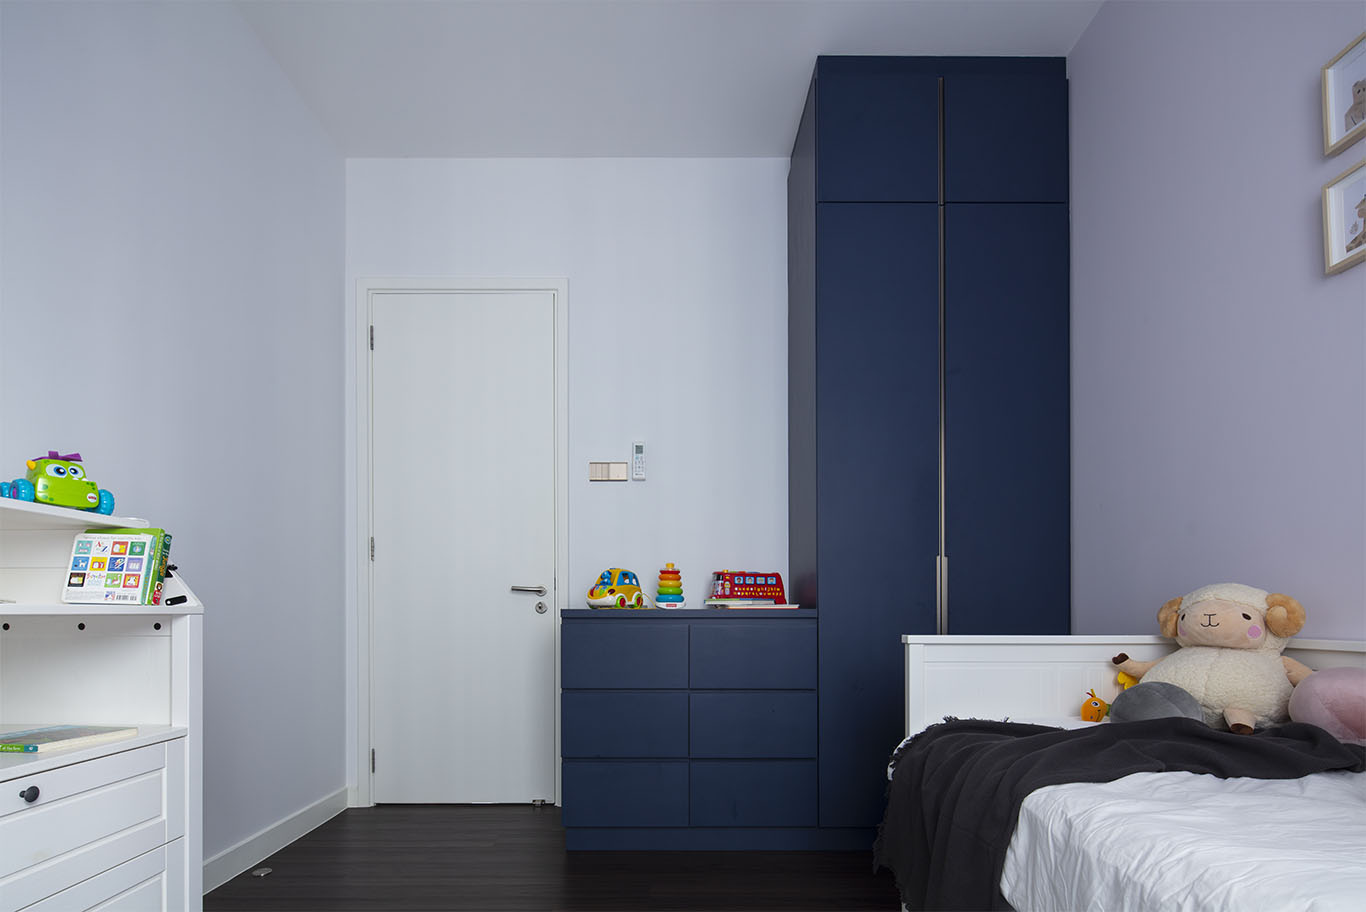 Modern minimalist kids bedroom with wooden floor, white wall, white drawer, white bed, bold blue color cupboard, and colorful toys